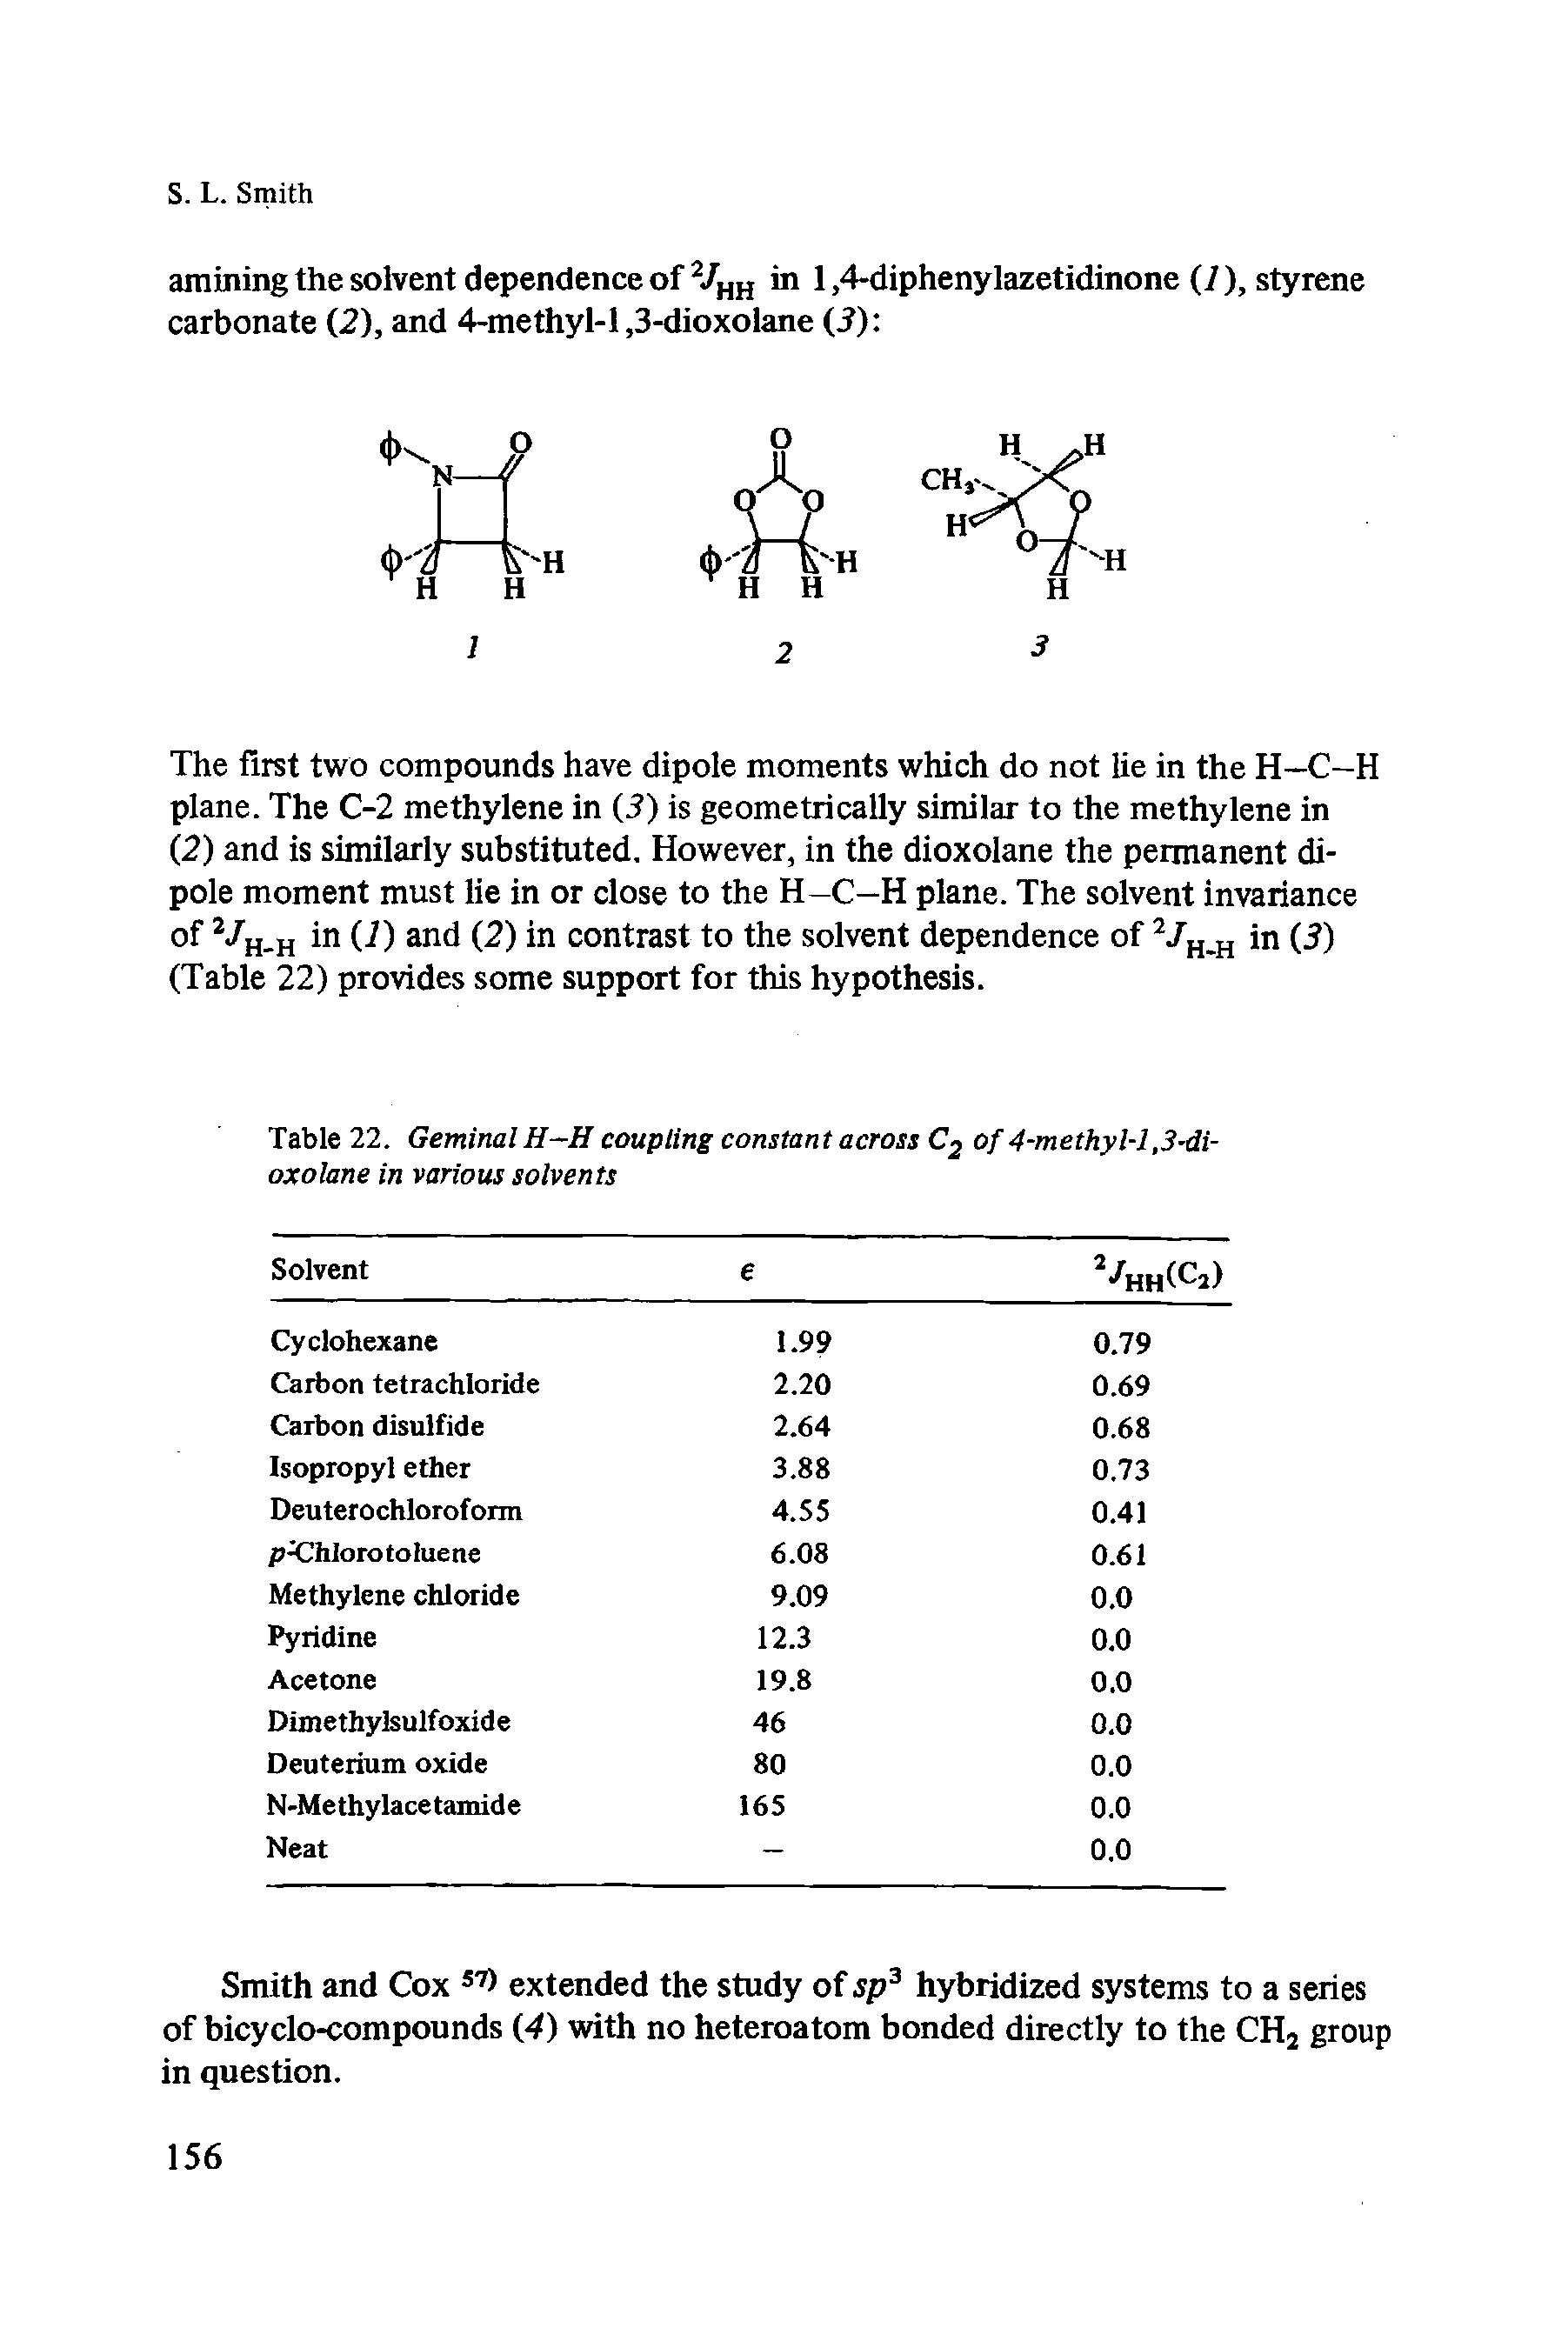 Table 22. Geminal H H coupling constant across C2 of 4-methyl-l, 3-dioxolane in various solvents...